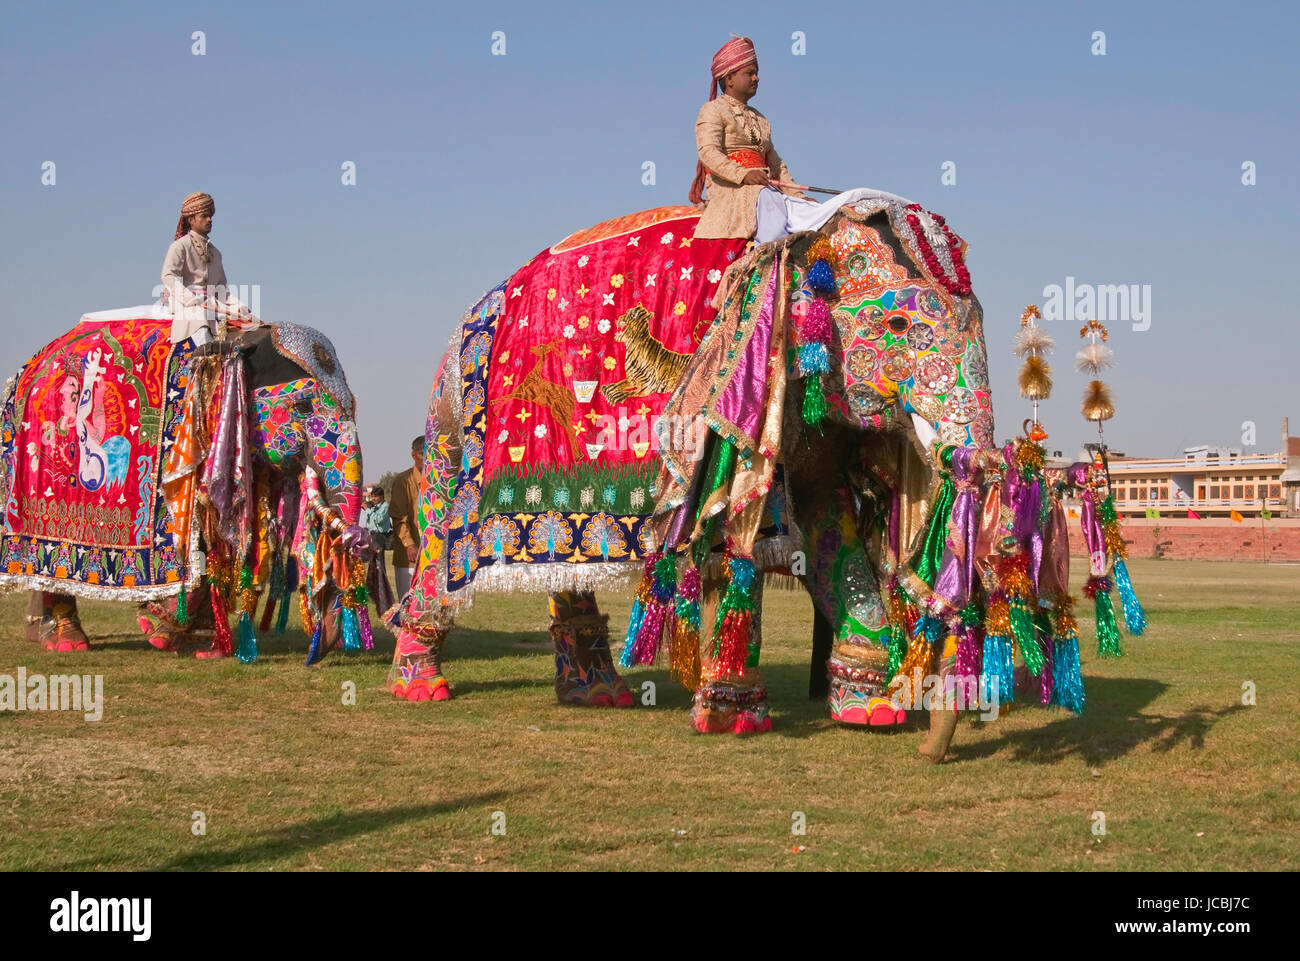 Decorated Indian Elephant (Elephas maximus indicus) and mahout parading at the annual elephant festival in Jaipur, Rajasthan, India. Stock Photo